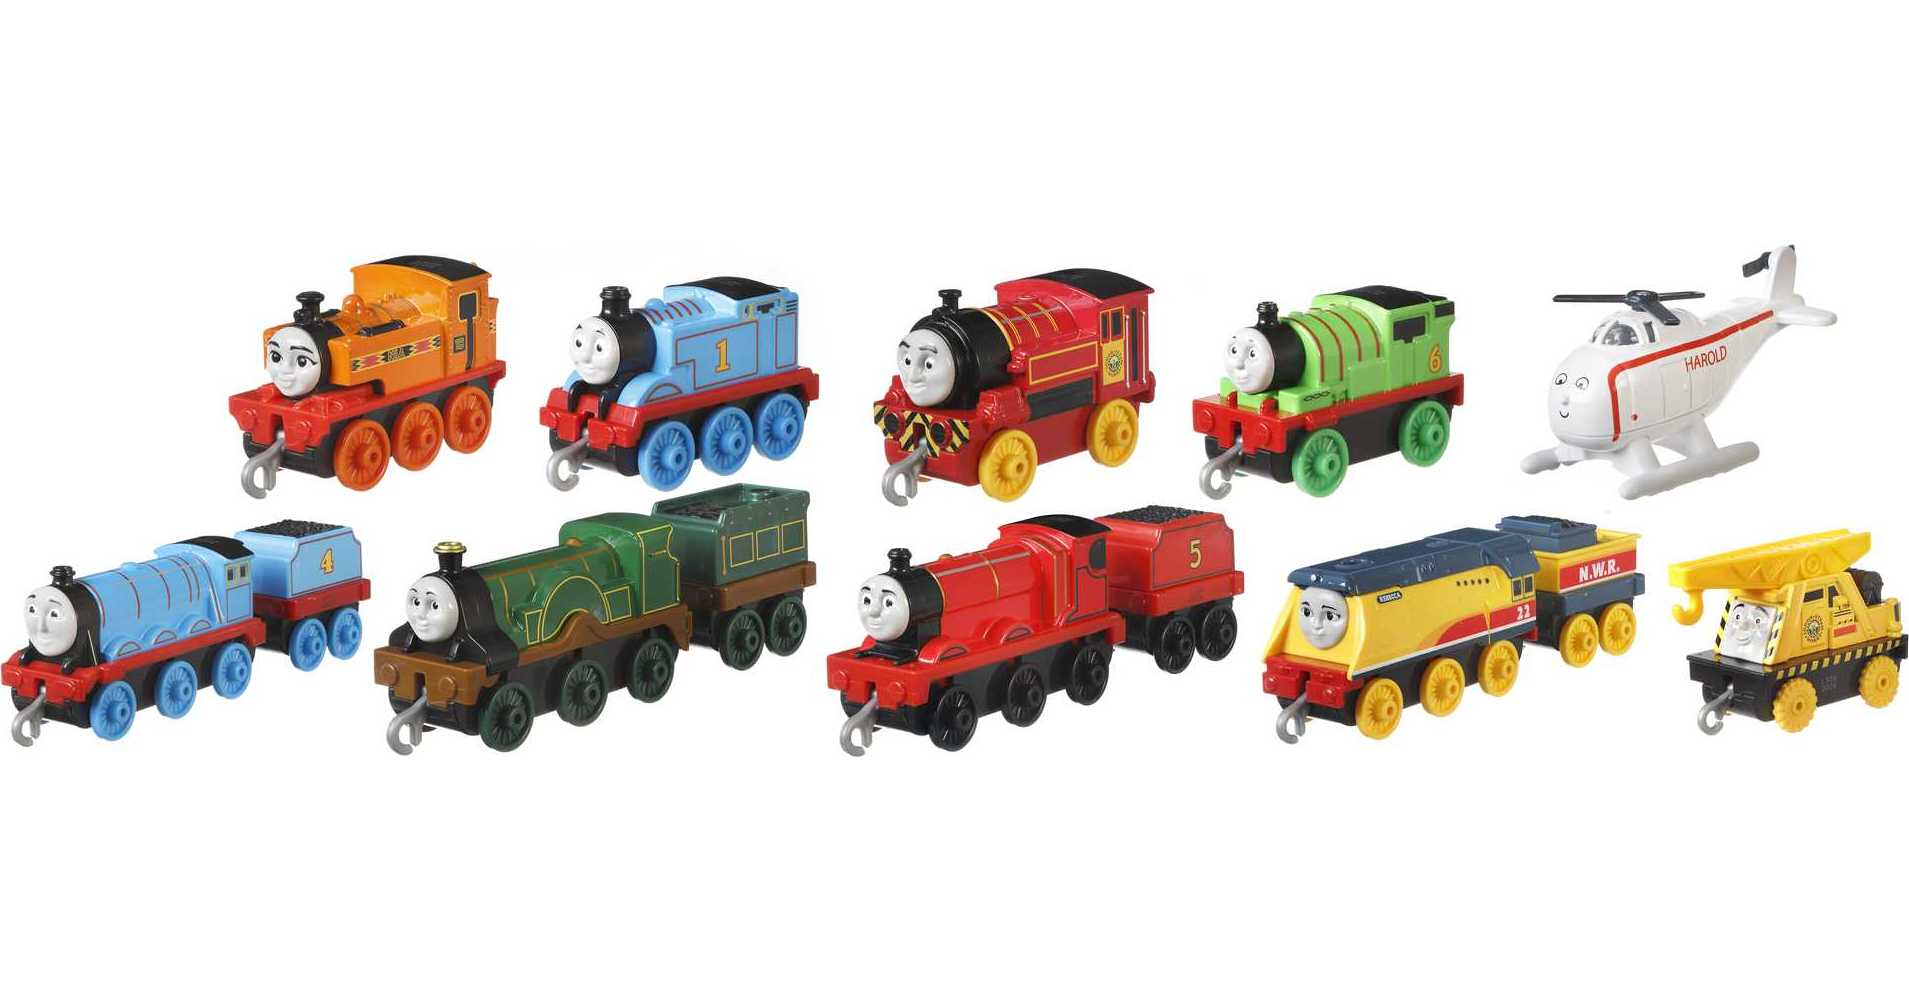 Thomas & Friends TrackMaster Sodor Steamies 10-Pack Diecast Toy Trains & Vehicles - image 2 of 7